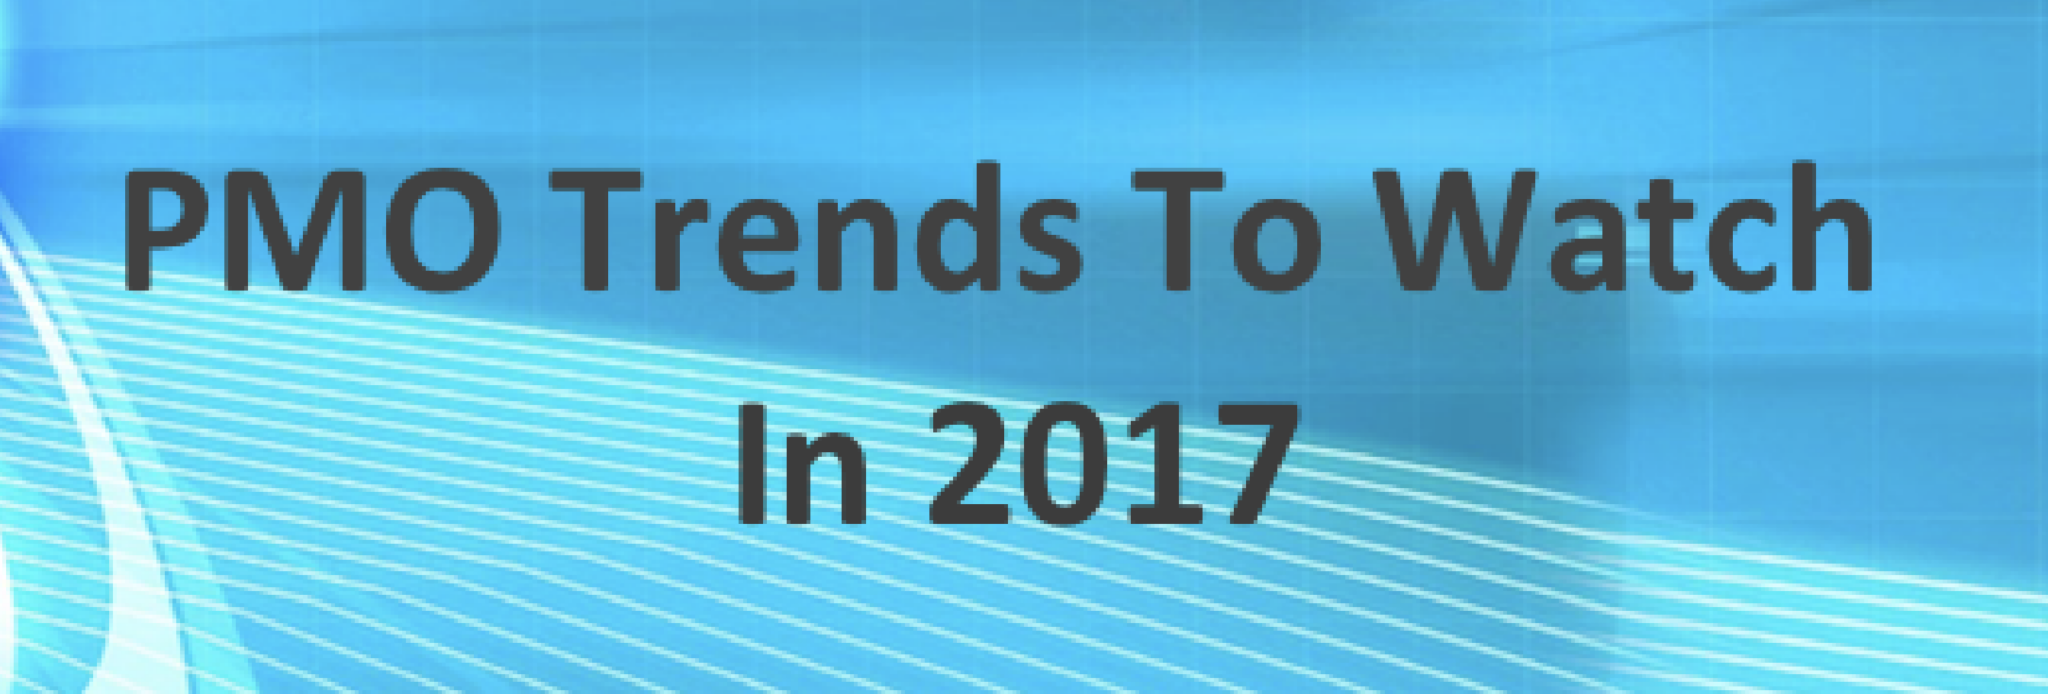 PMO Trends To Watch In 2017